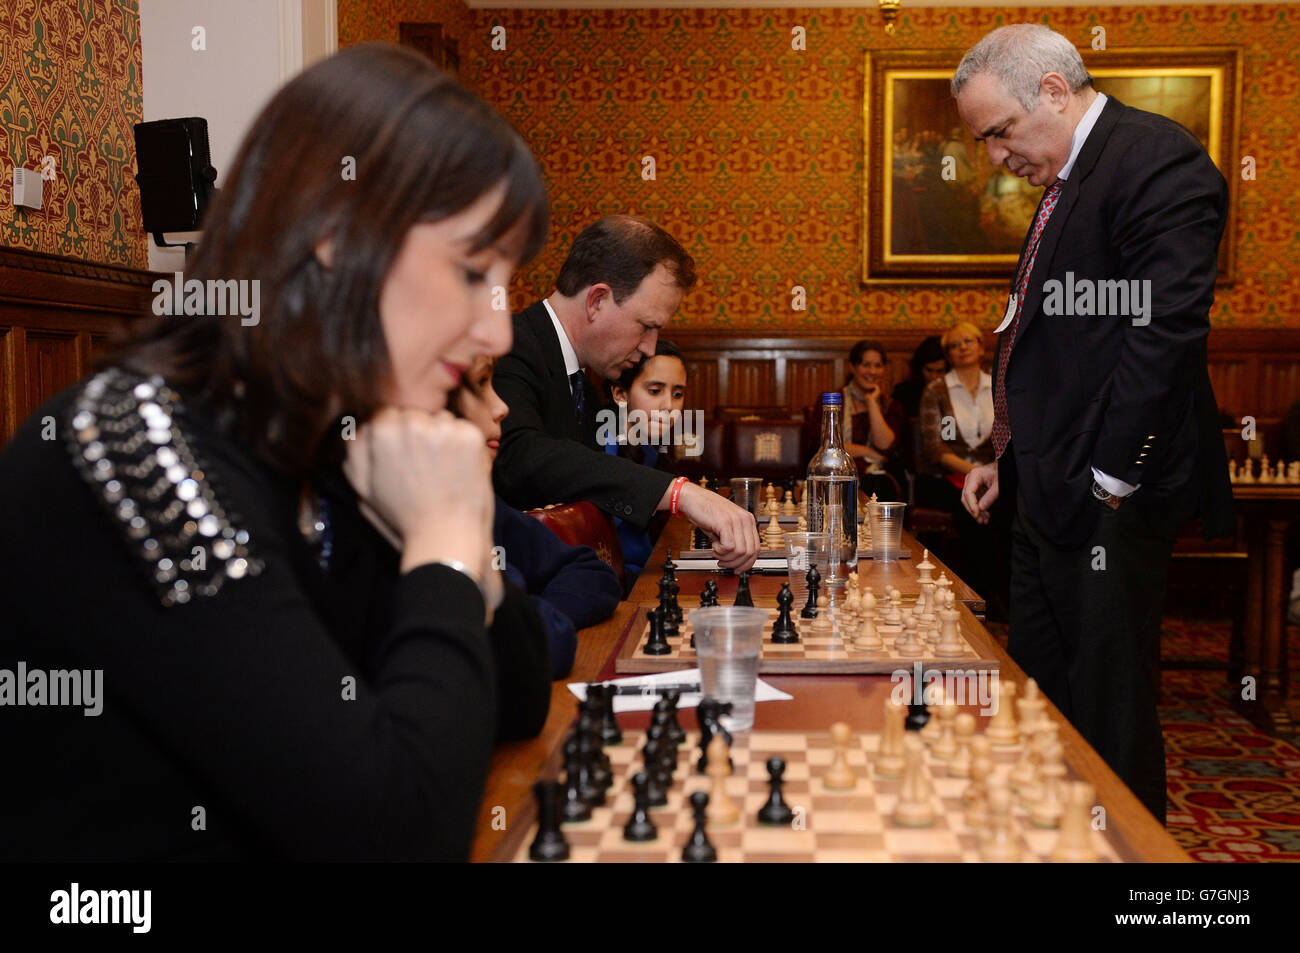 Garry Kasparov on Russia, chess, and the great gambit of AI